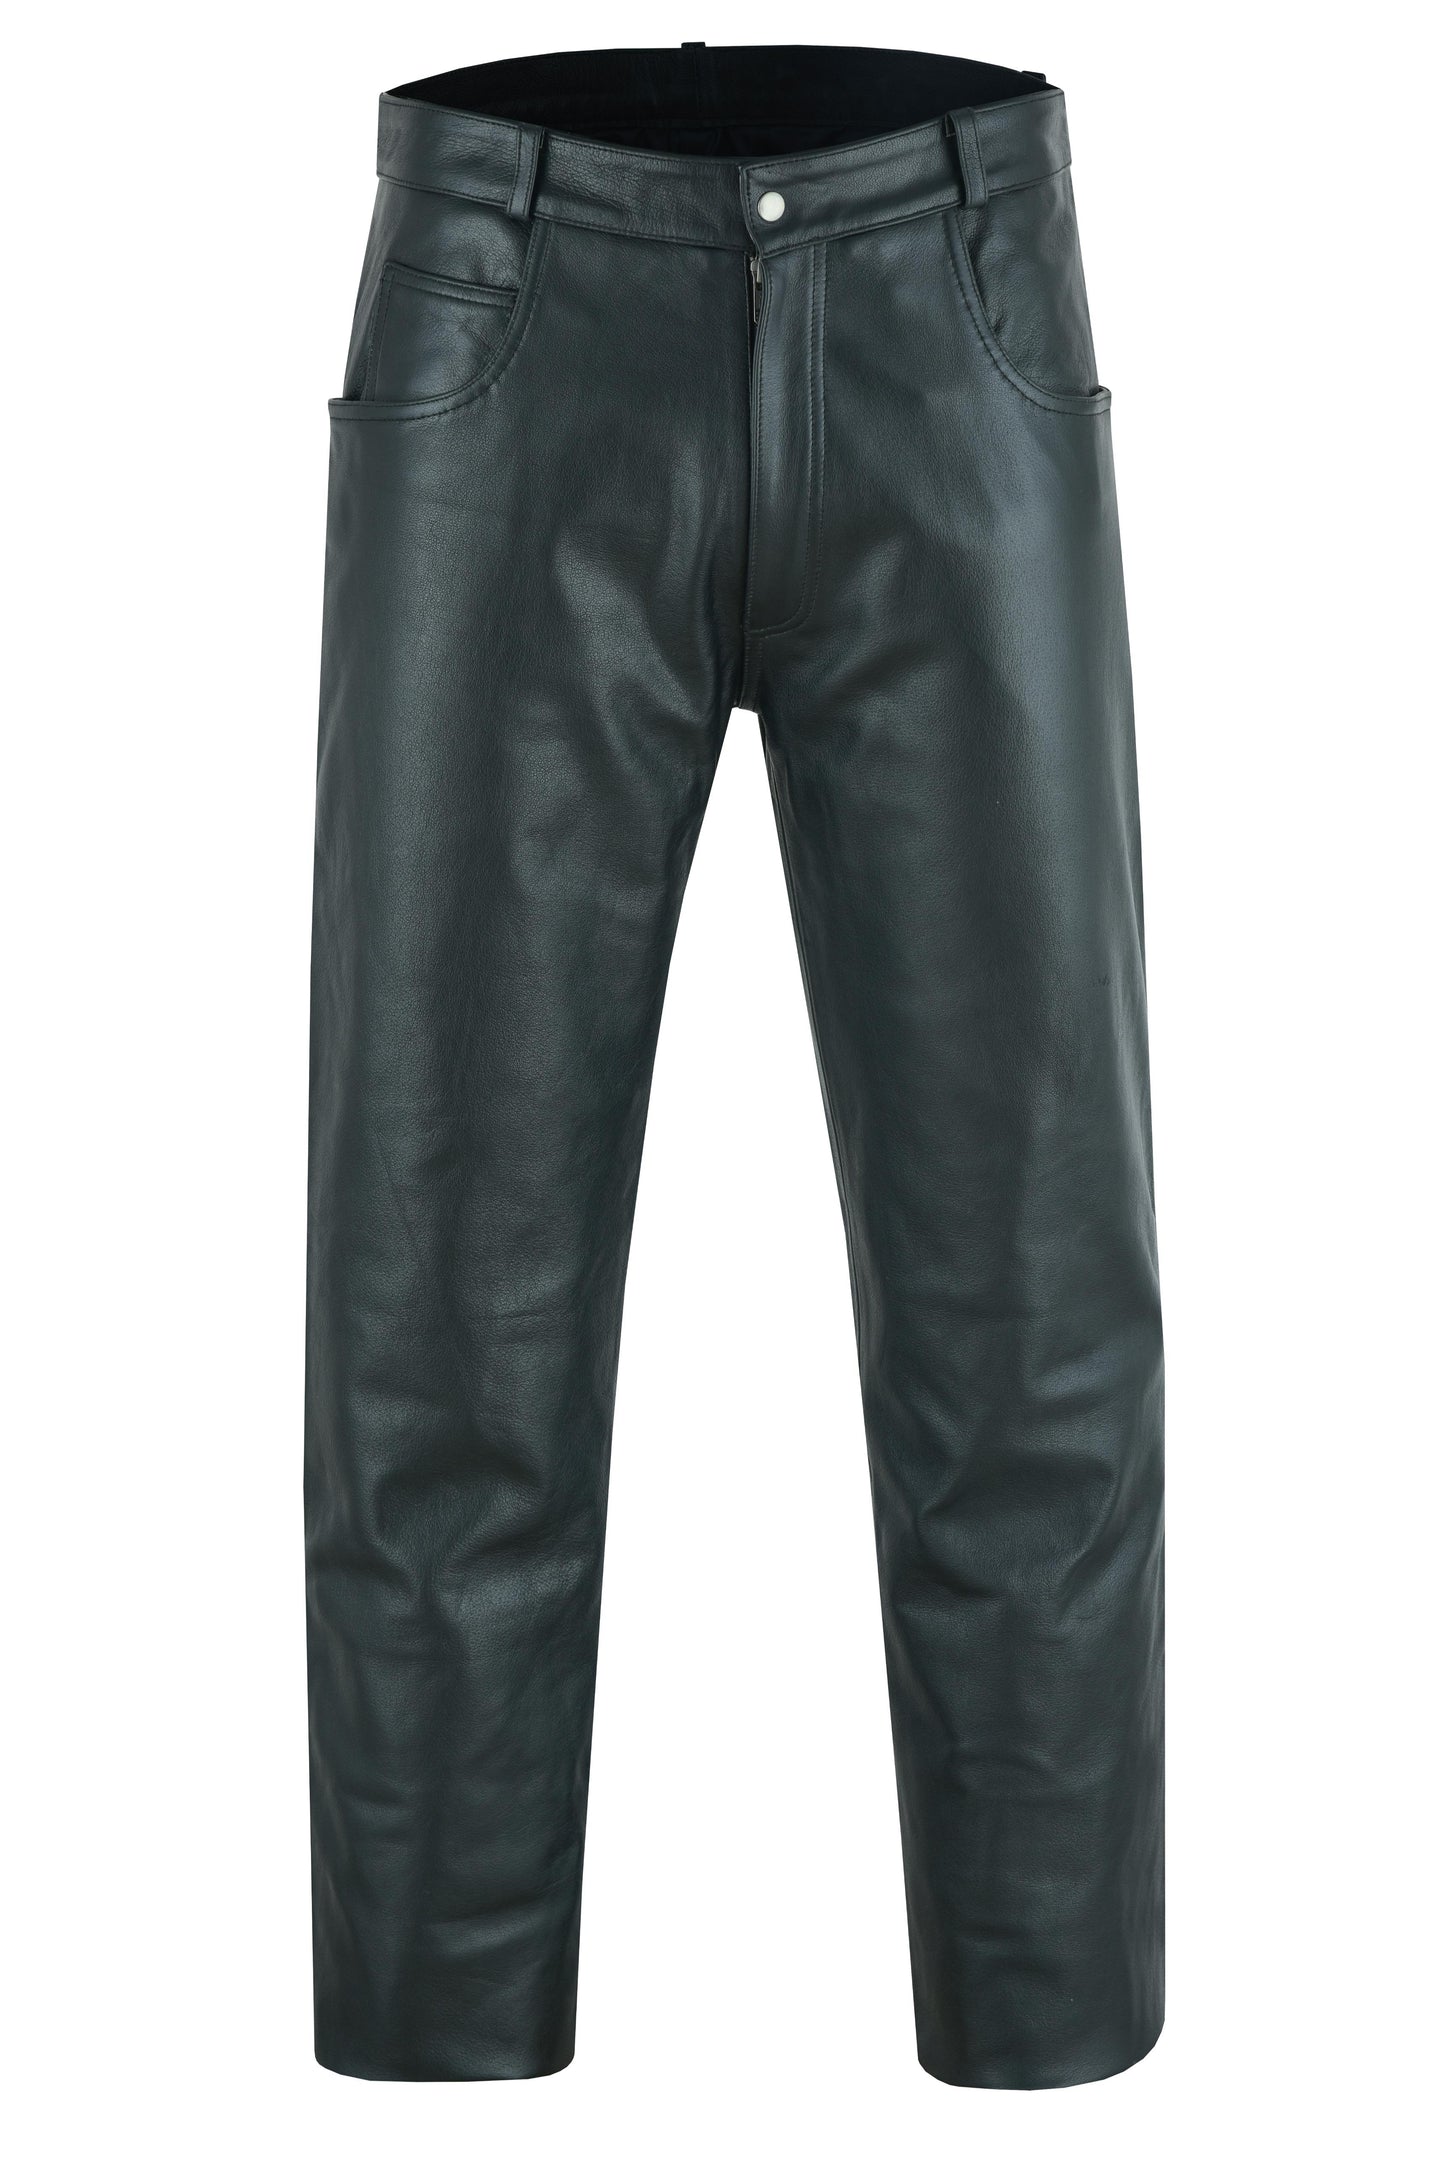 Men's Black Classic 5 Pocket Casual Motorcycle Leather Pants